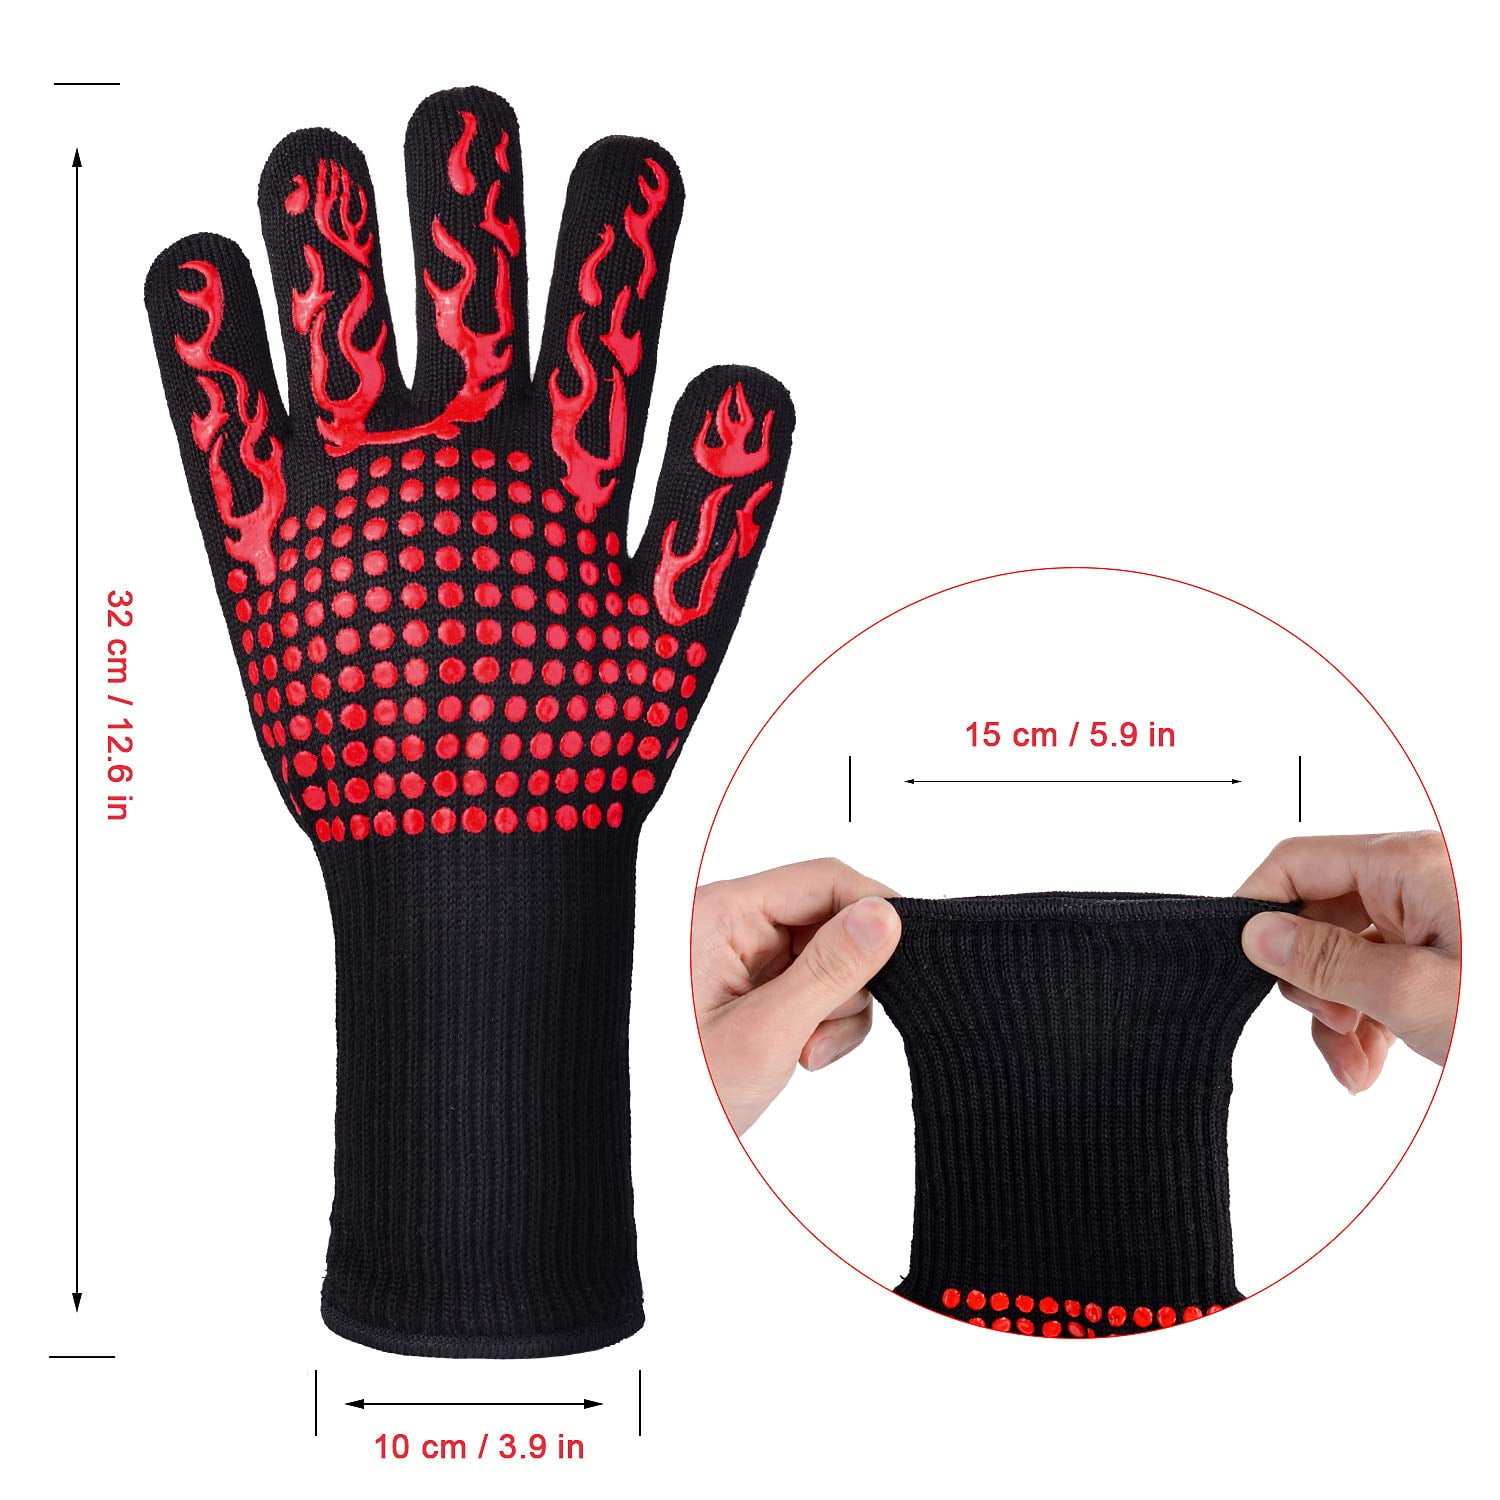 Floweret BBQ Grill Gloves,1472℉ Extreme Heat Resistant Grilling Gloves Silicone Non-Slip Oven Mitts Potholder for Barbecue Cutting Cooking Baking Black 14 Inch Welding 